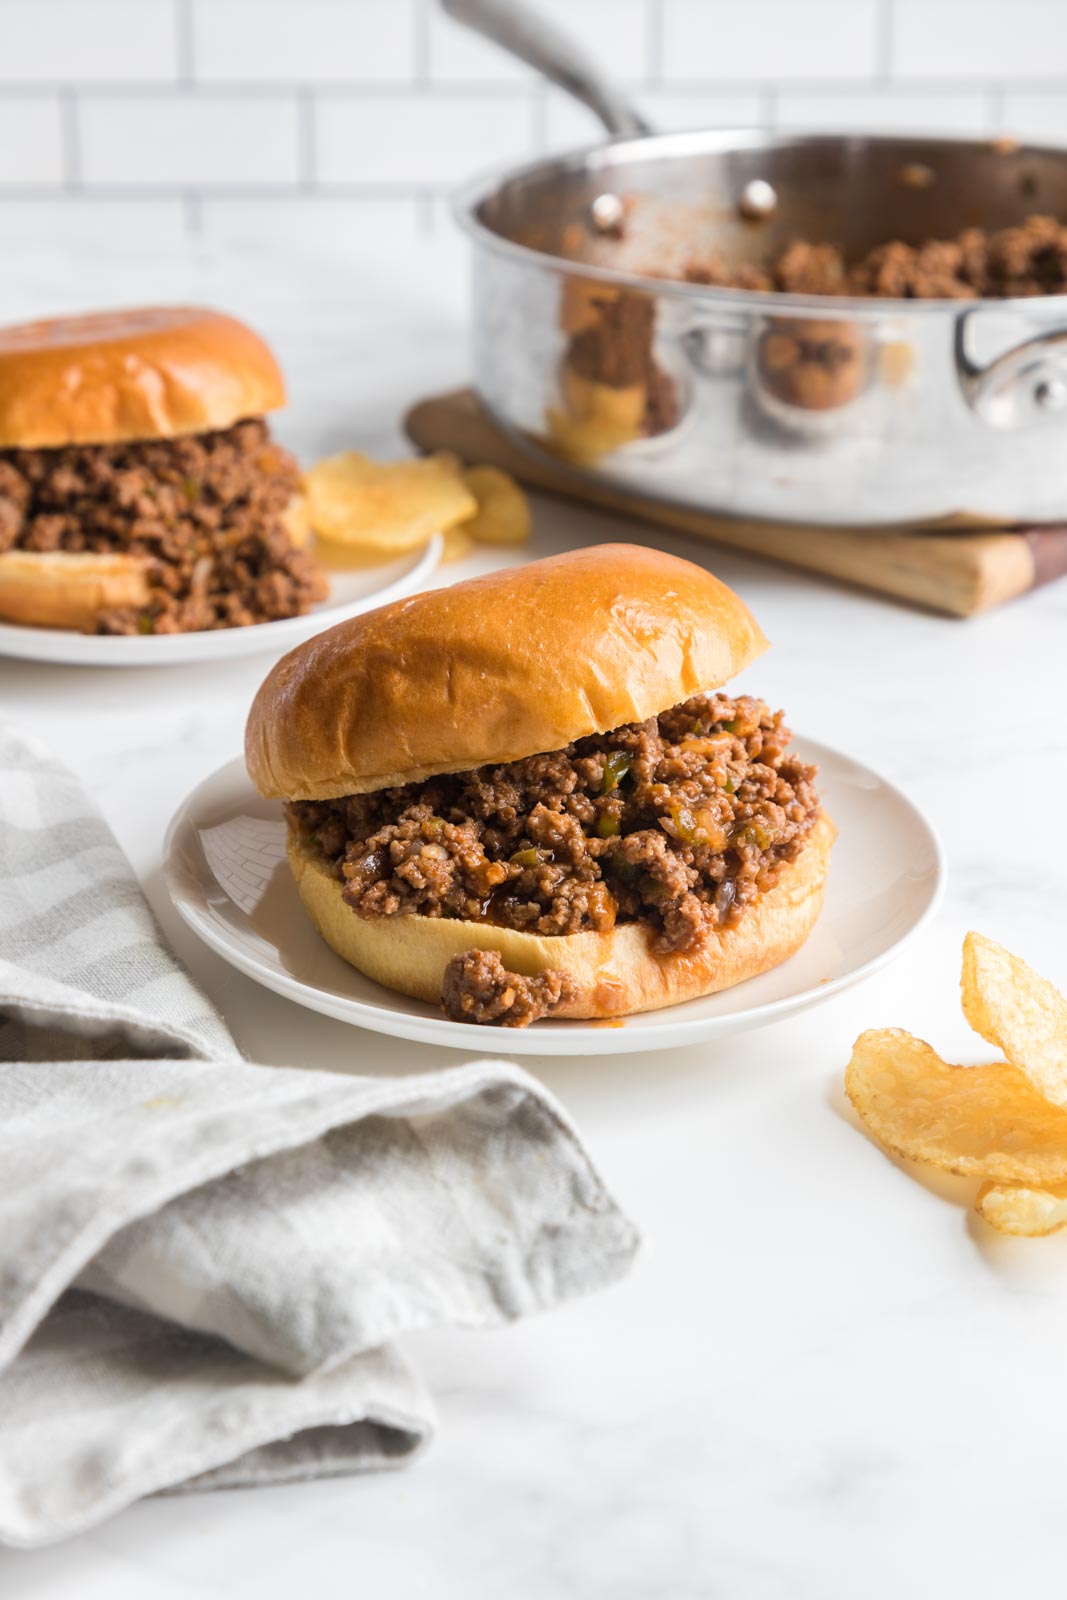 two sloppy joes on buns on plates on a table with a skillet in the background